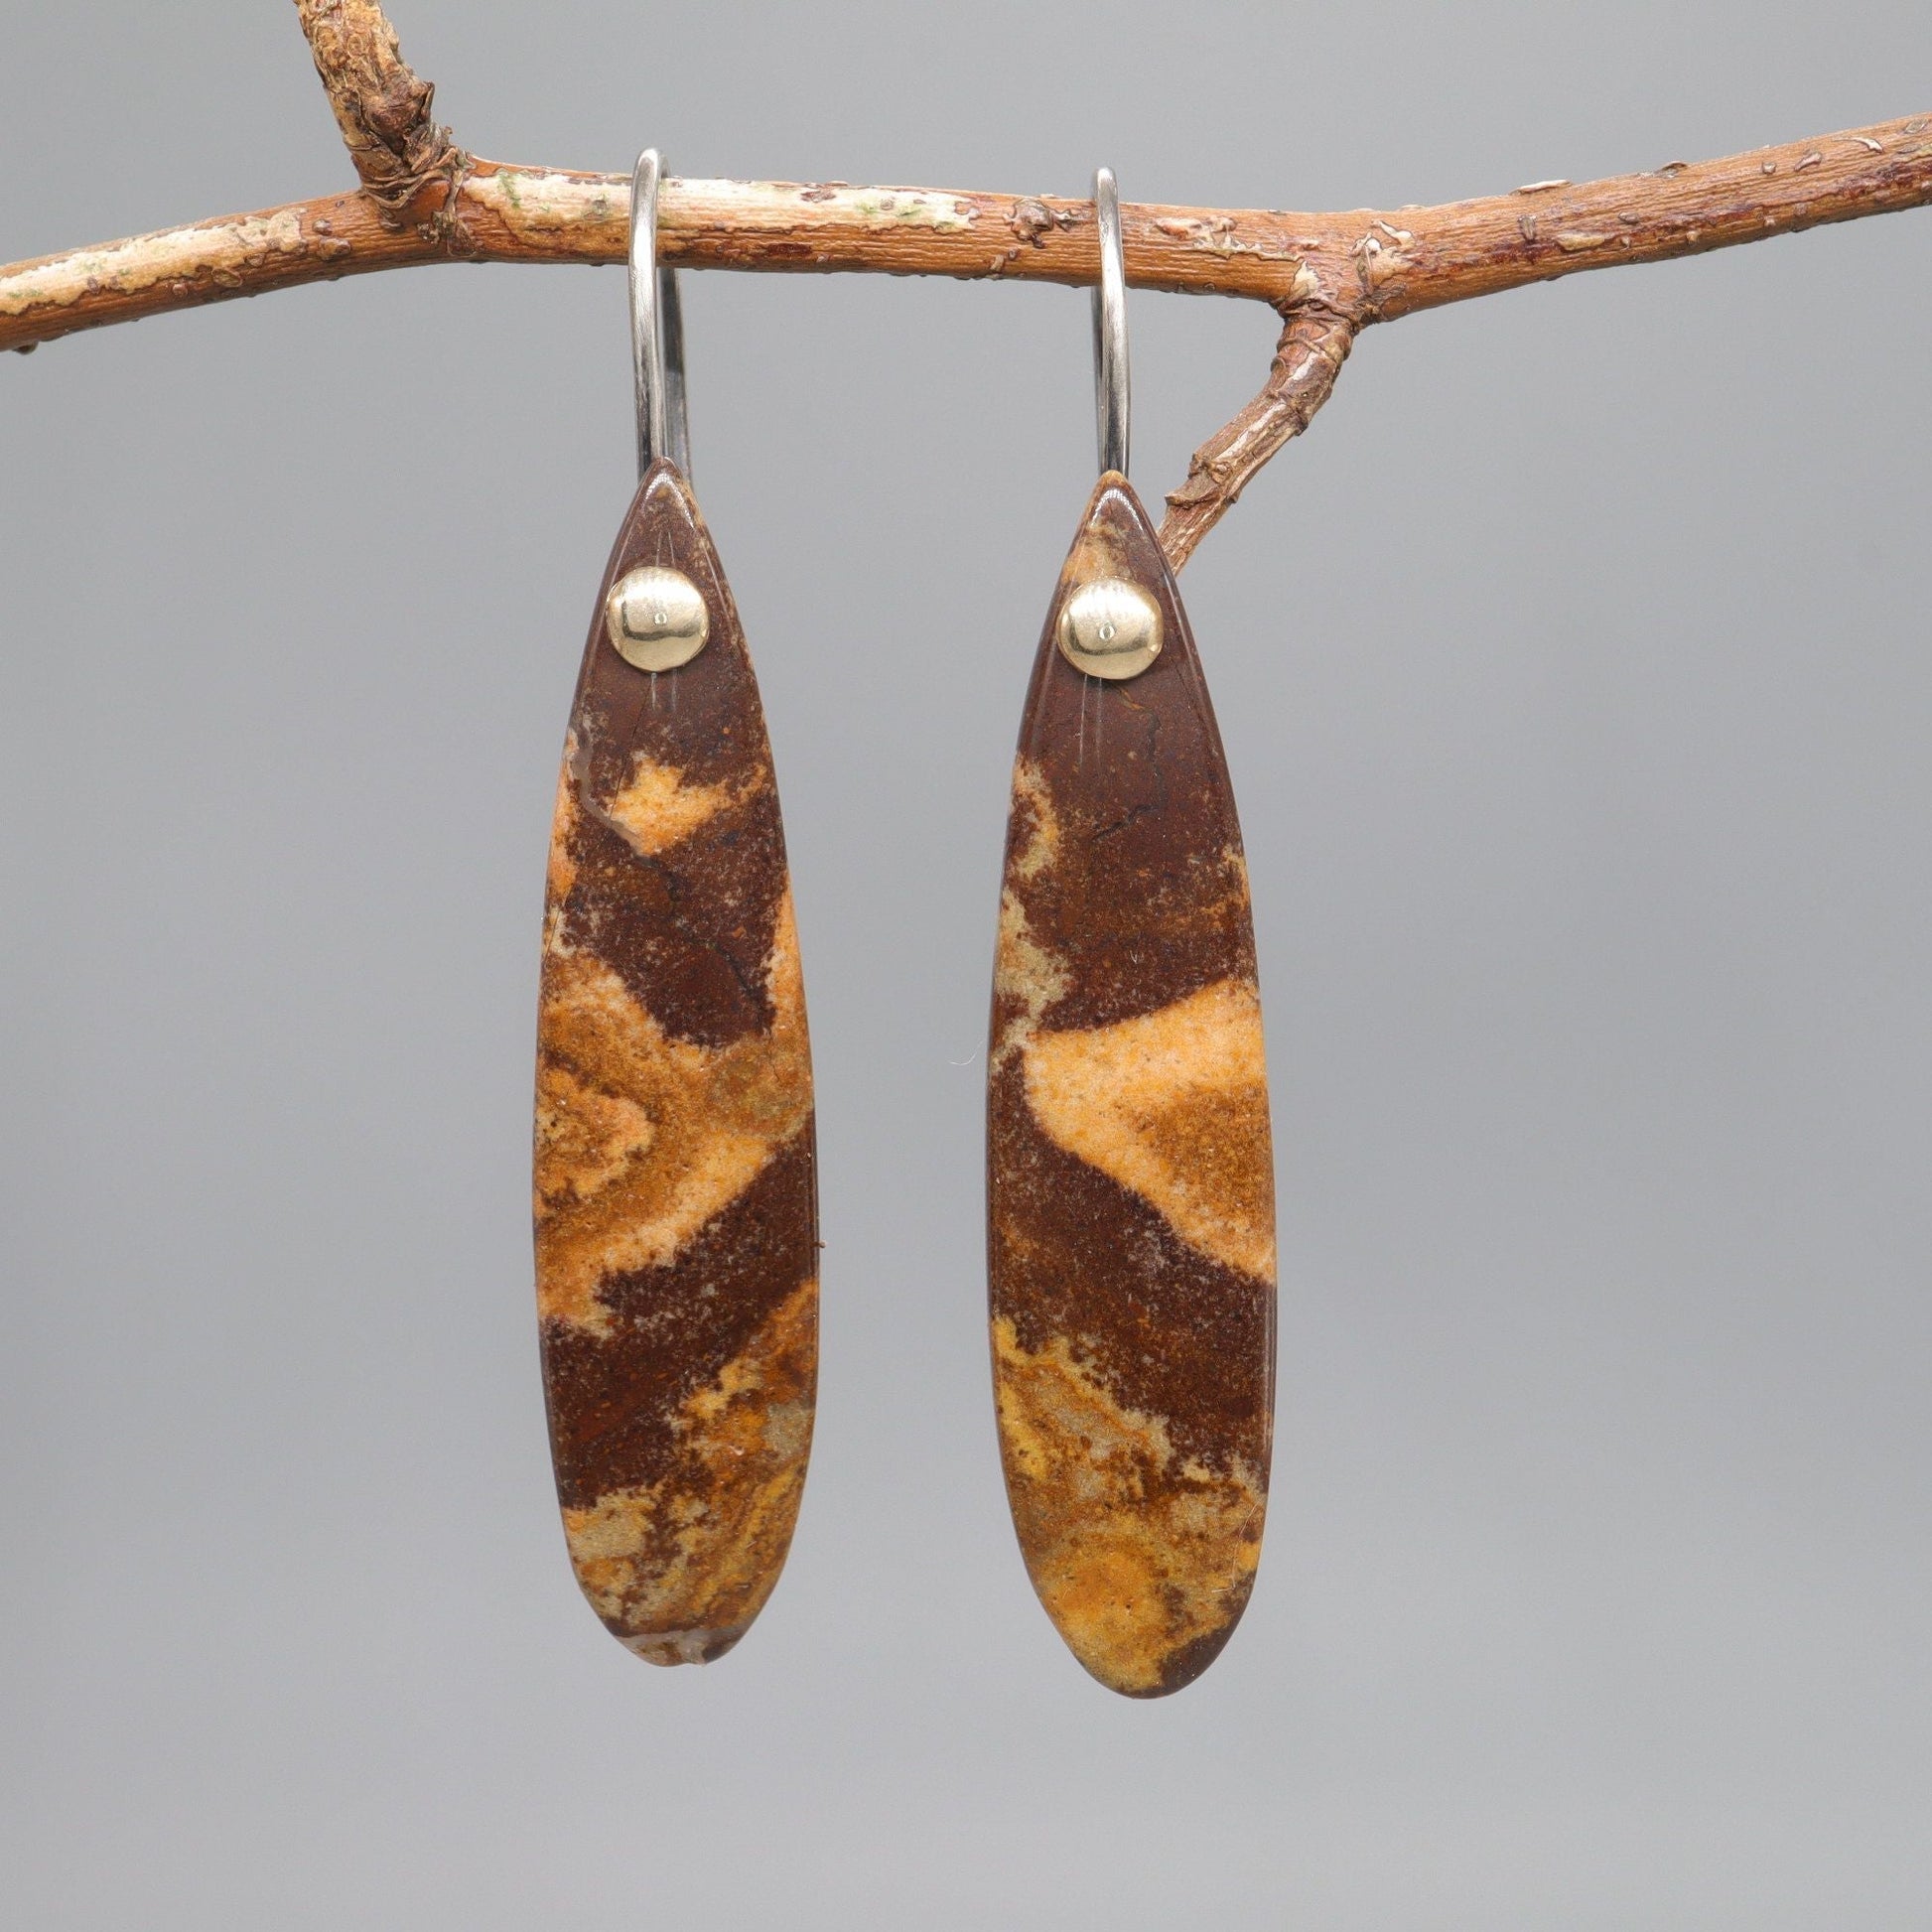 Drop earrings, Australian Outback Jasper gemstones with antique dark silver and gold fittings - Gretna Green Wedding Rings